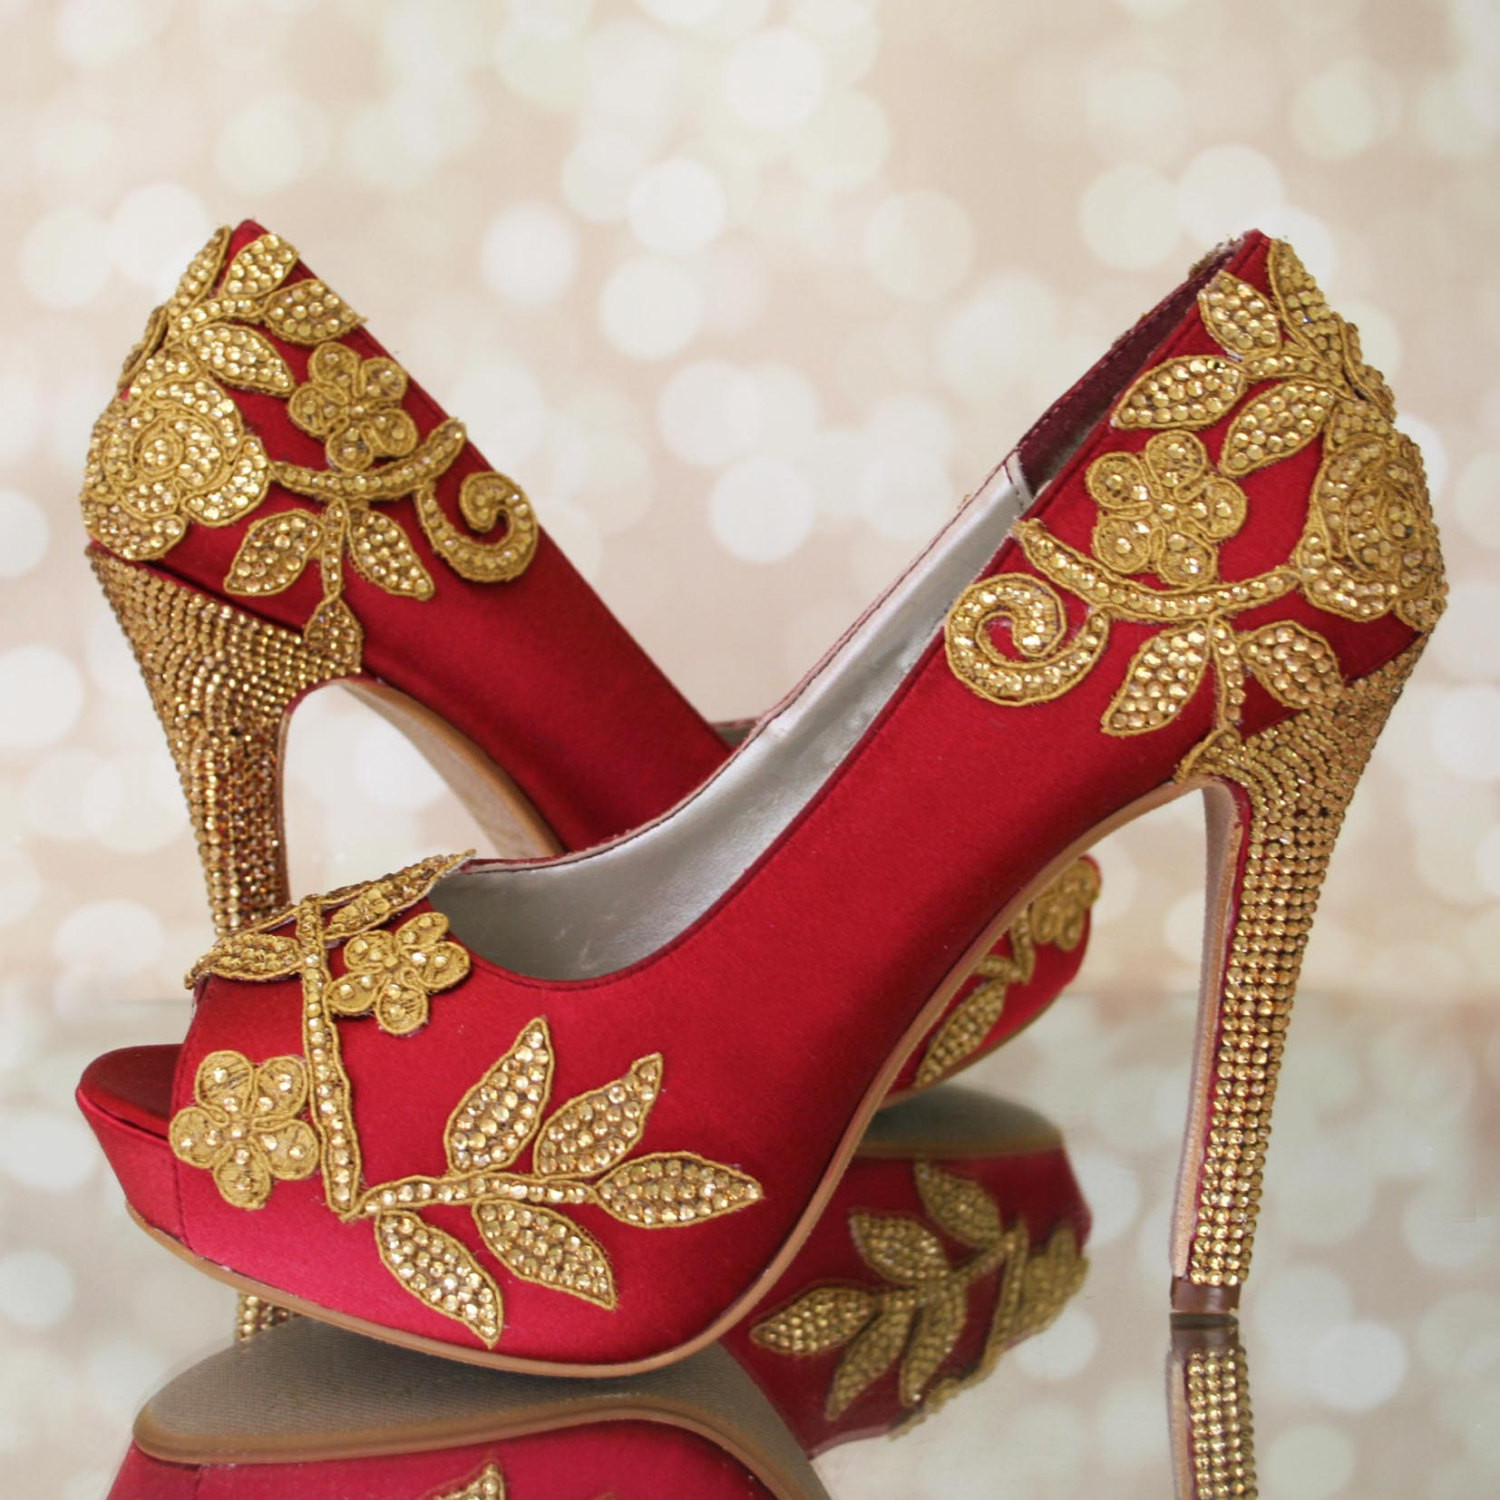 Red Wedding Shoes
 Indian Wedding Indian Bride Red Wedding Shoes High Heel